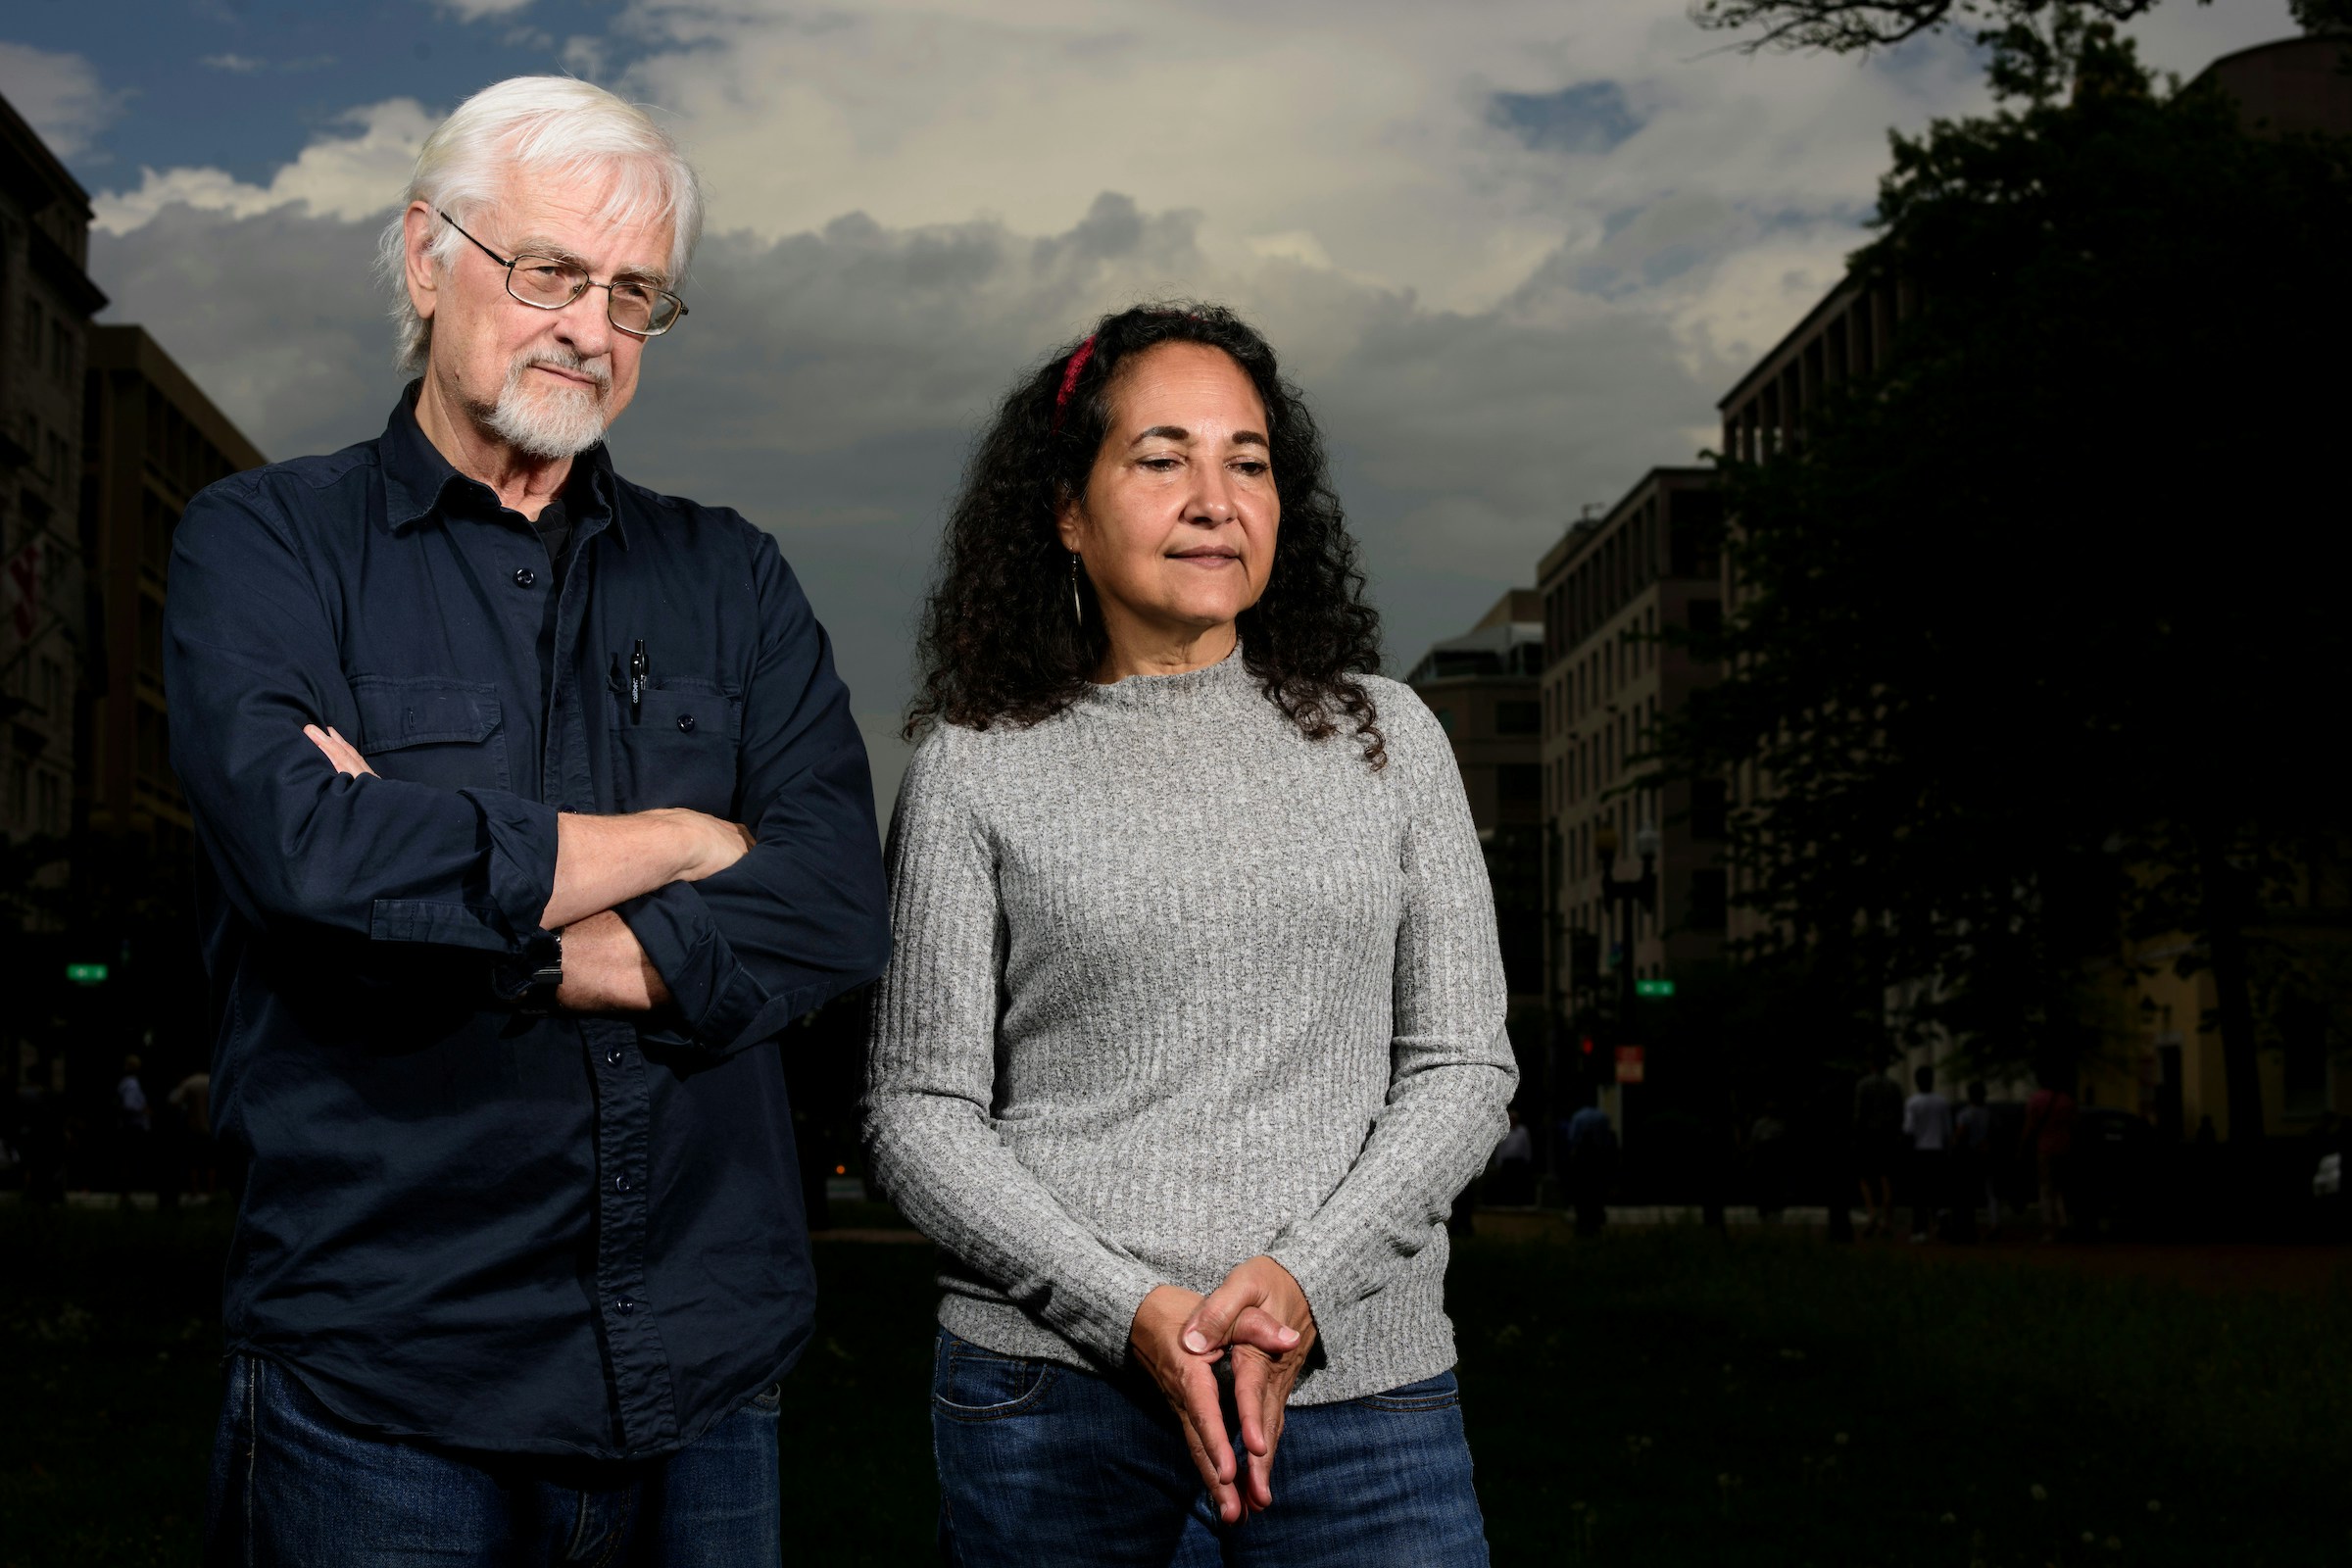 Washington, D.C. - April 21, 2017: John Vadermeer and Ivette Perfecto are both Ecologists at the University of Michigan. The married couple, photographed at Lafayette Square in Washington D.C. Friday April 21, 2017, are in Washington for the March for Science on Saturday.CREDIT: Matt Roth